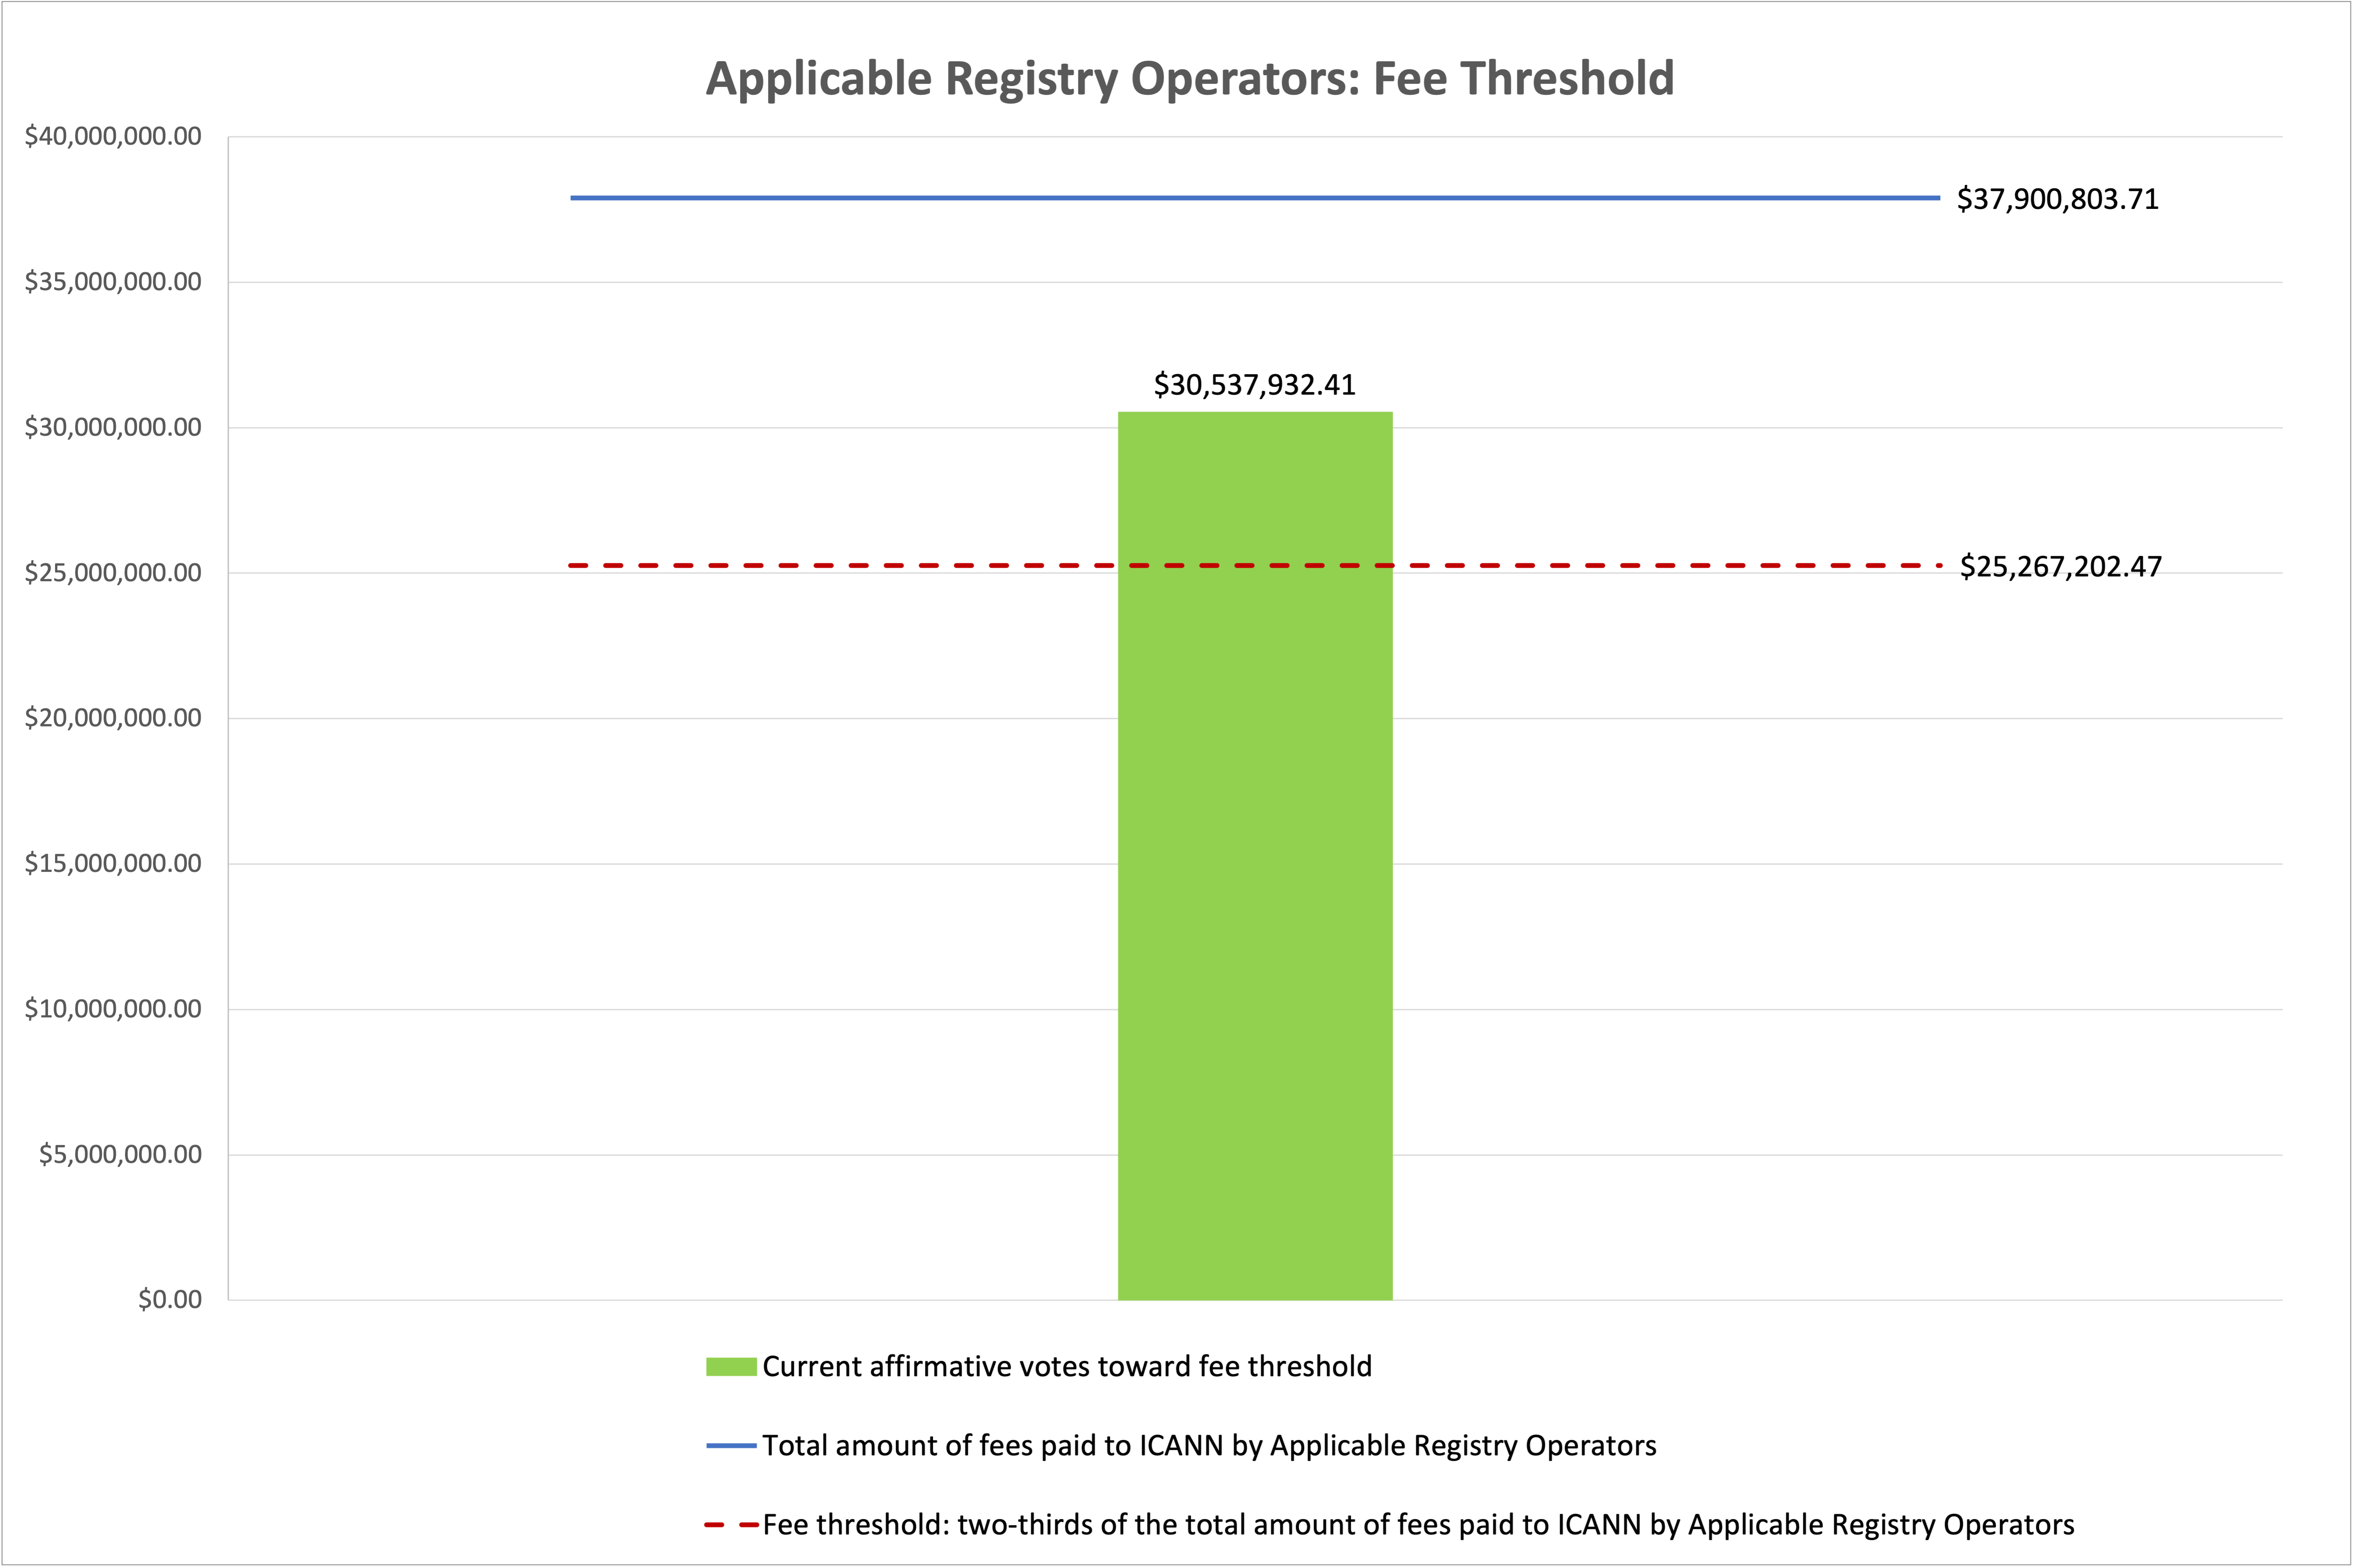 Bar chart of the progress of the vote towards meeting the fee threshold for Applicable Registry Operators. Fee approval threshold of $25,267,202.47 with current affirmative votes toward the fee threshold at $30,537,932.41